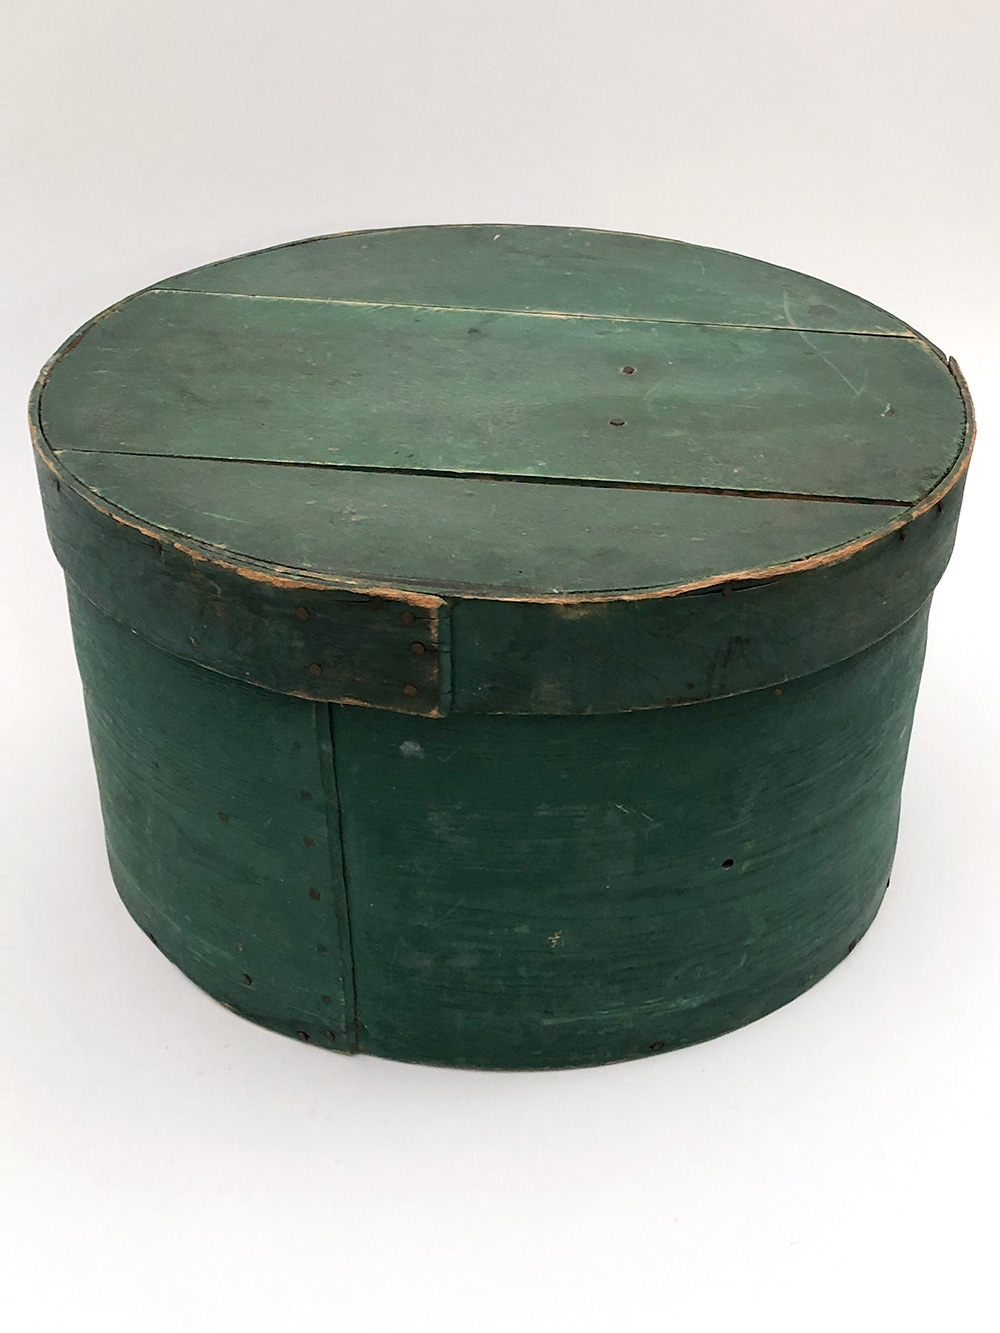 Huge Antique Cheese Box in Original Green Paint